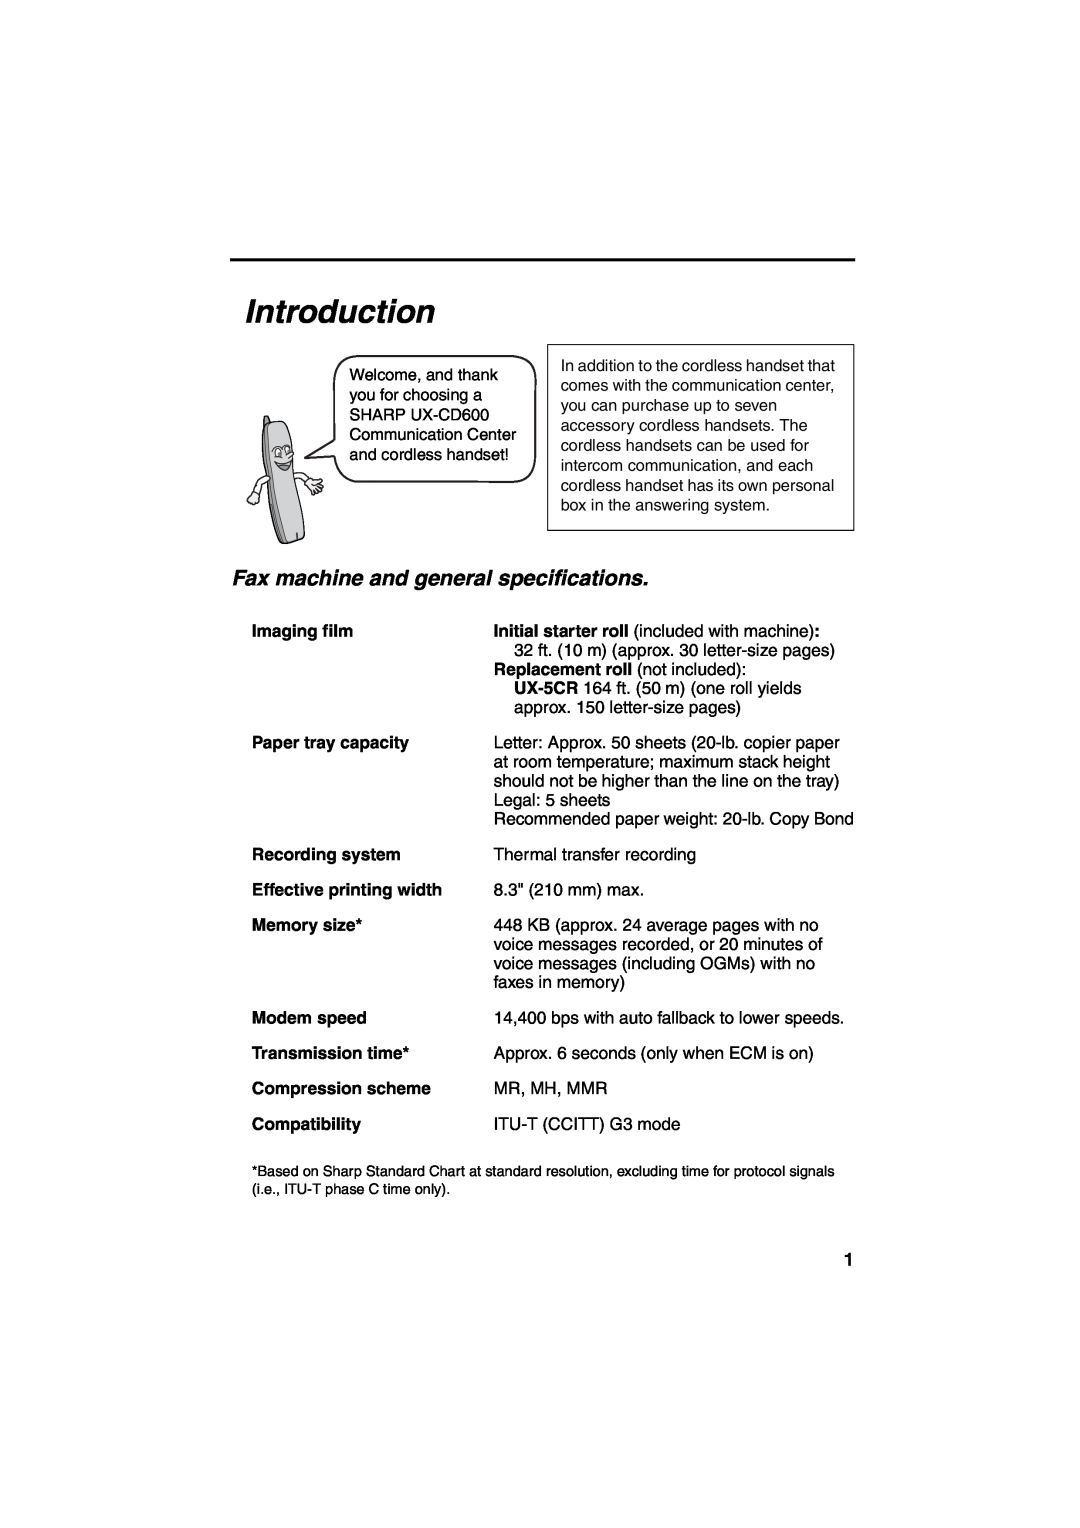 Sharp UX-CD600 operation manual Introduction, Fax machine and general specifications 